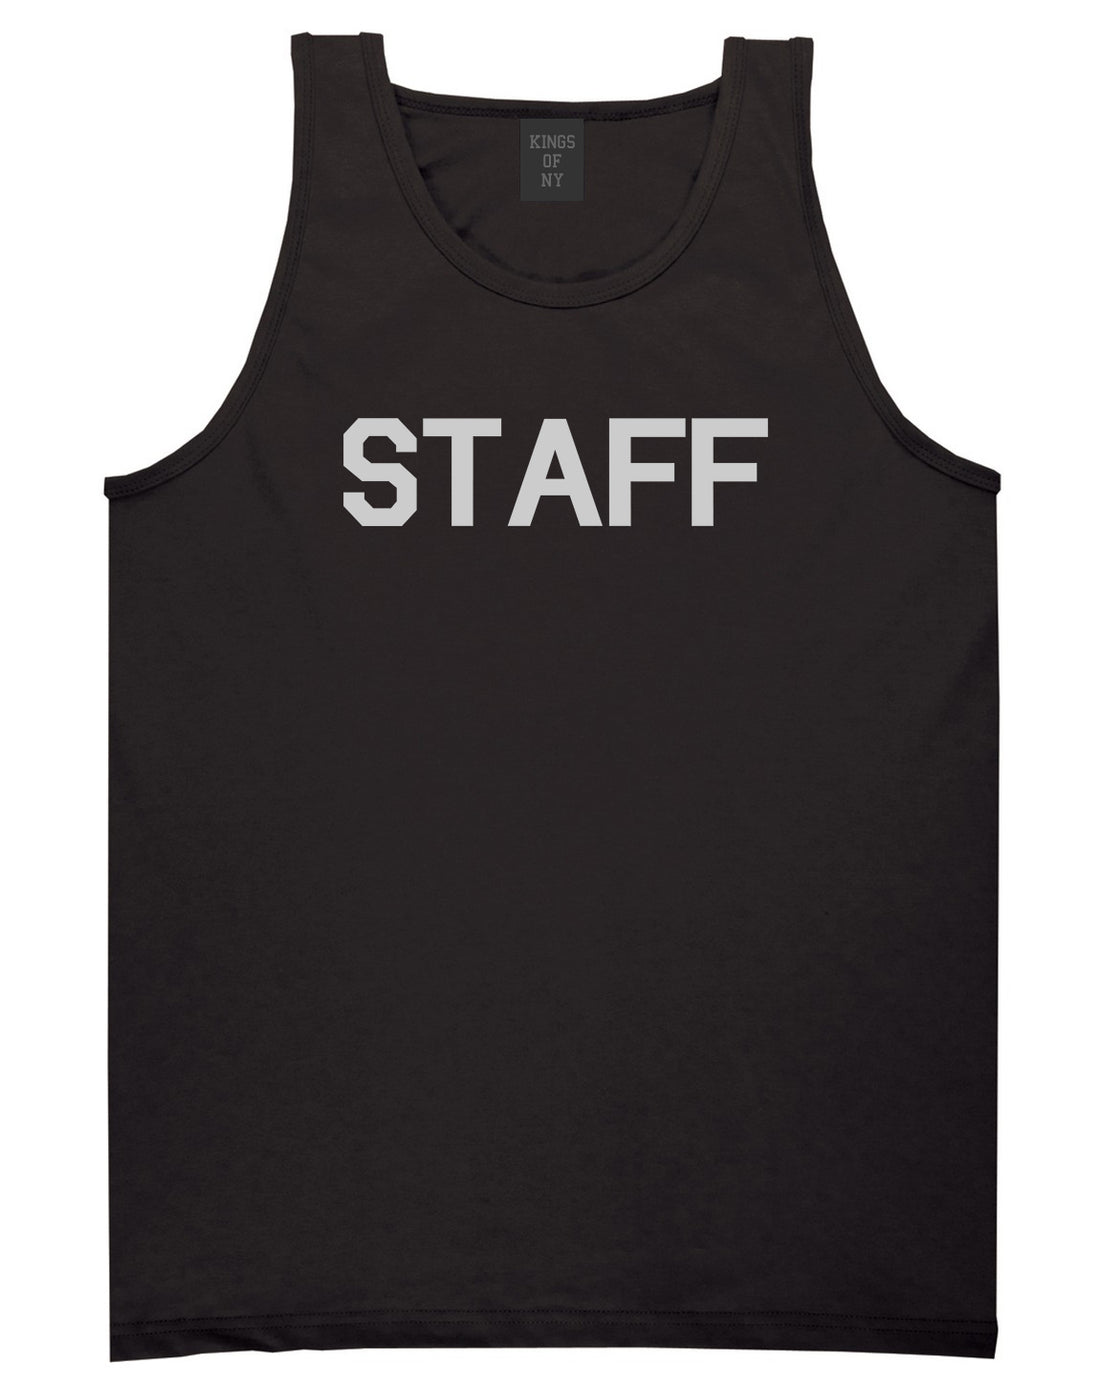 Staff Club Concert Event Mens Black Tank Top Shirt by KINGS OF NY